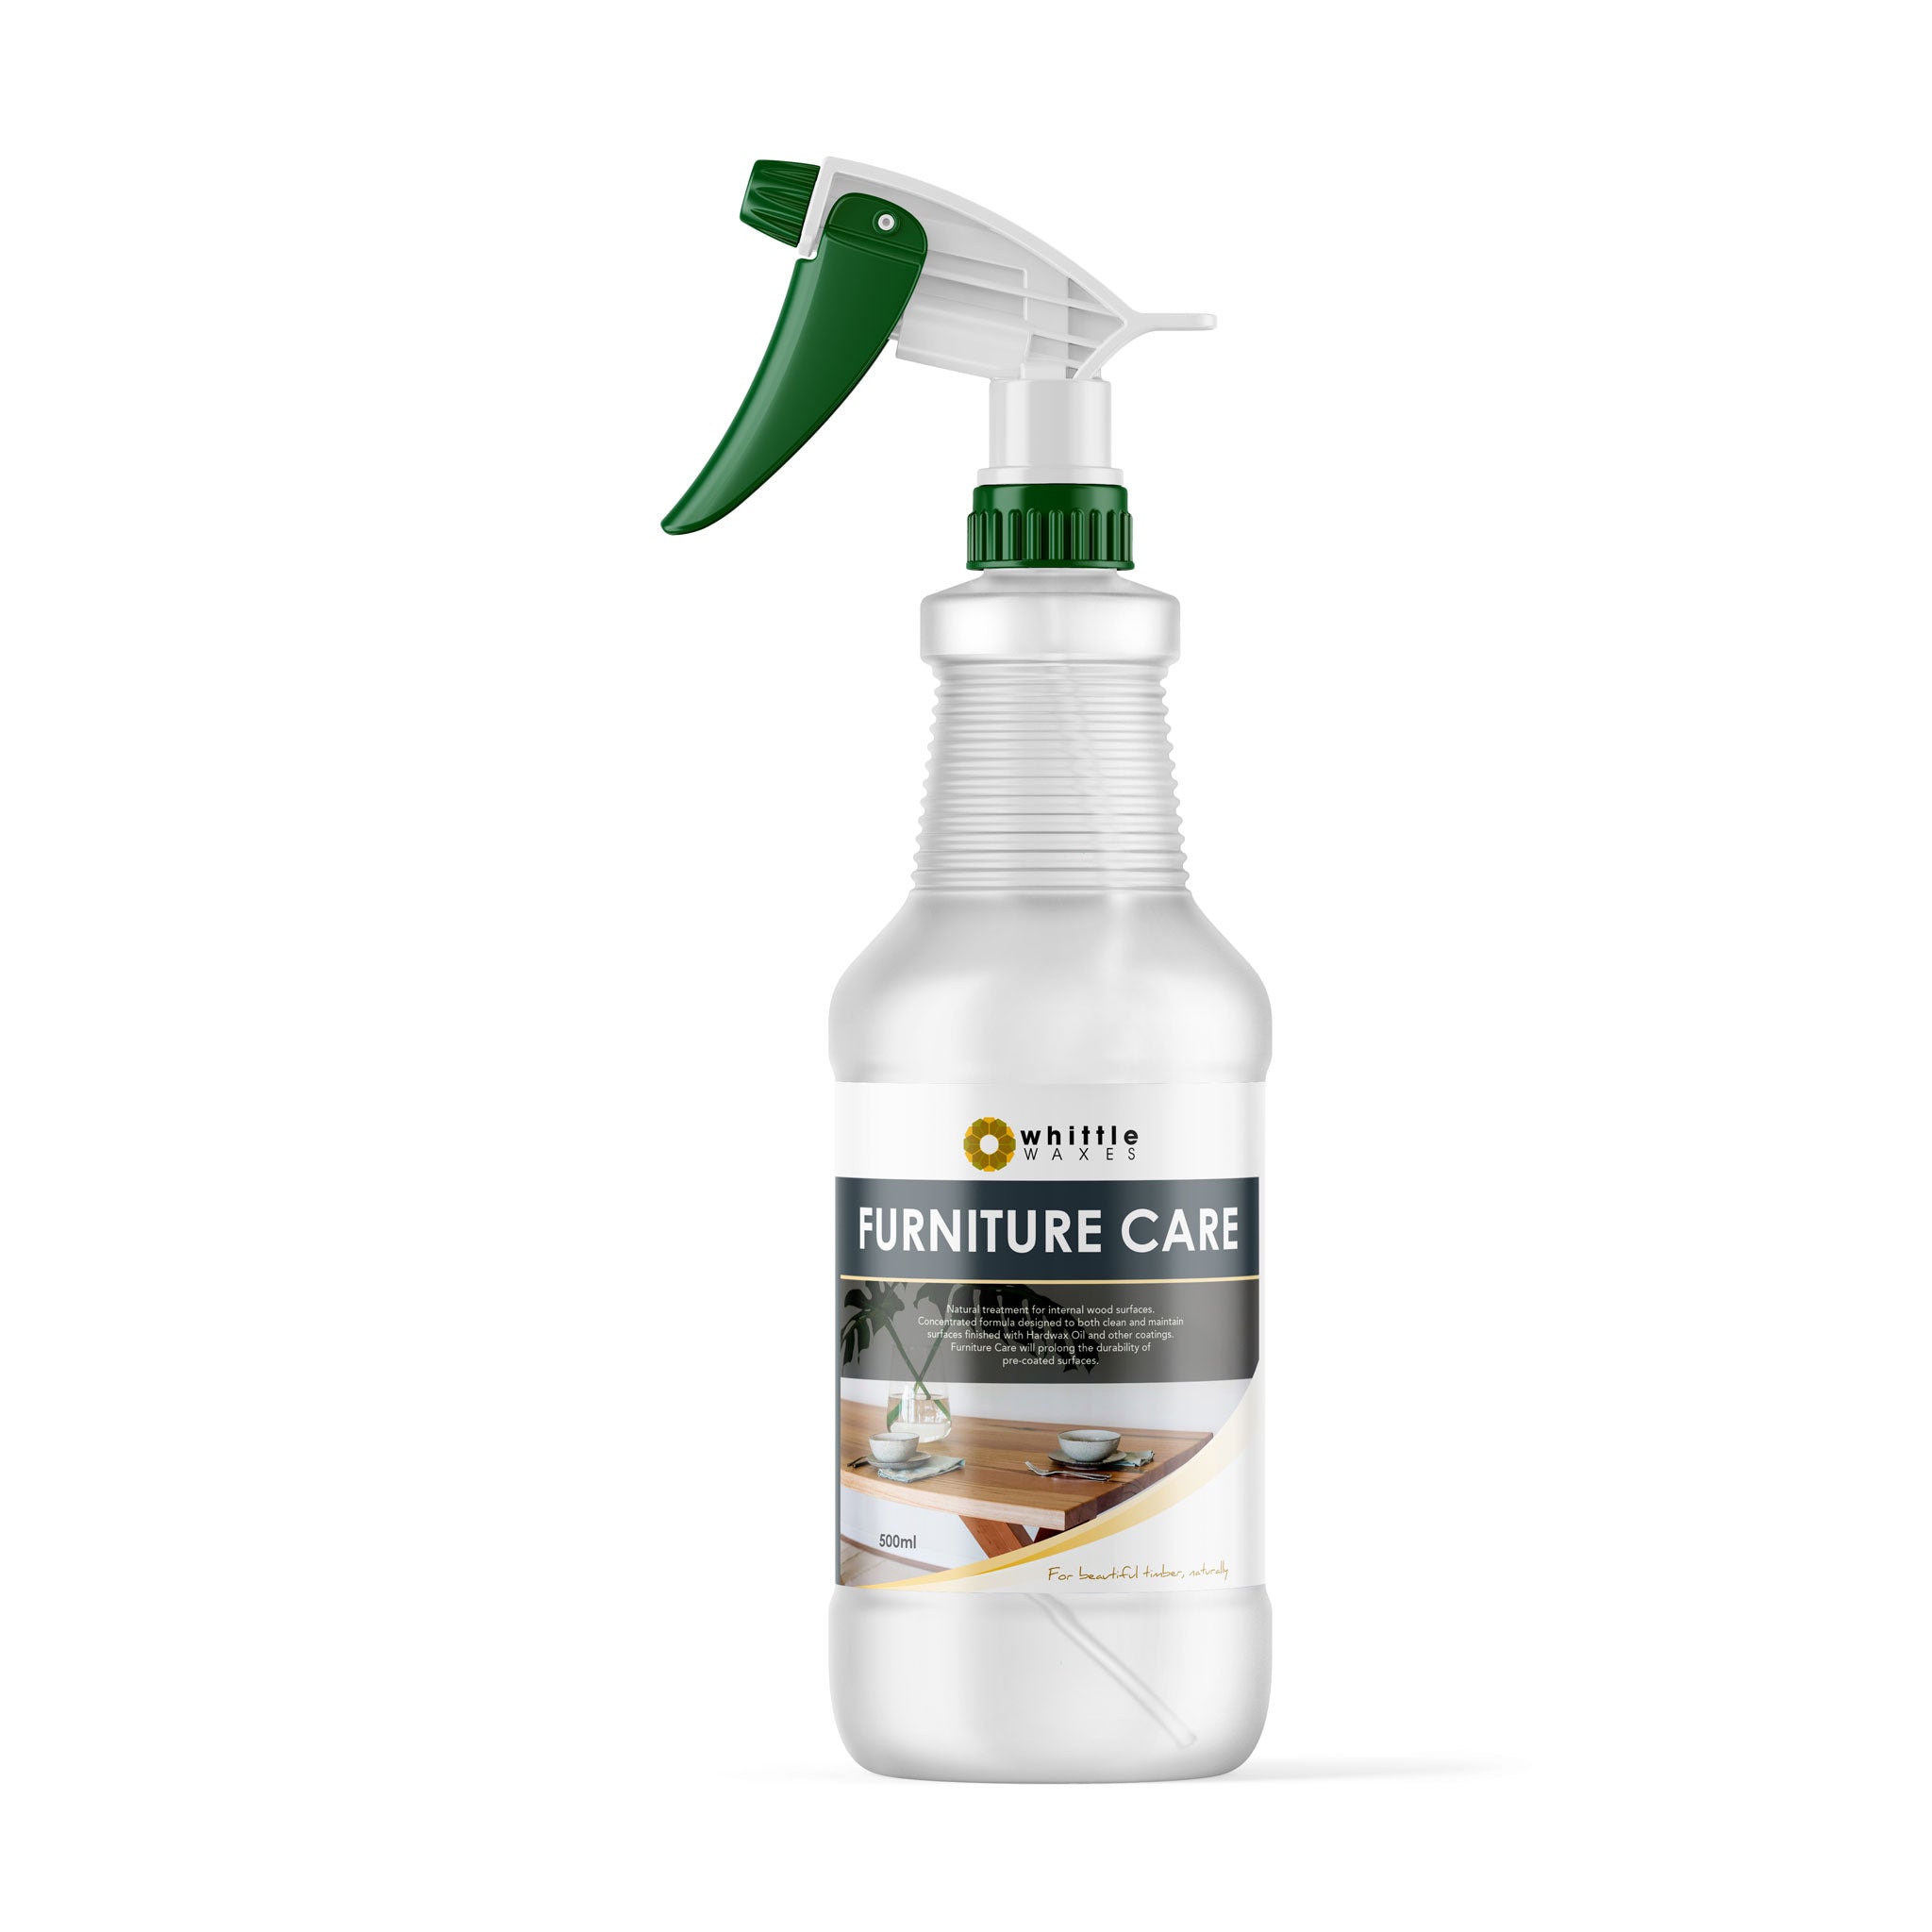 Whittle Waxes Furniture Care - cleaning and care treatment for wooden furniture - 500ml spray